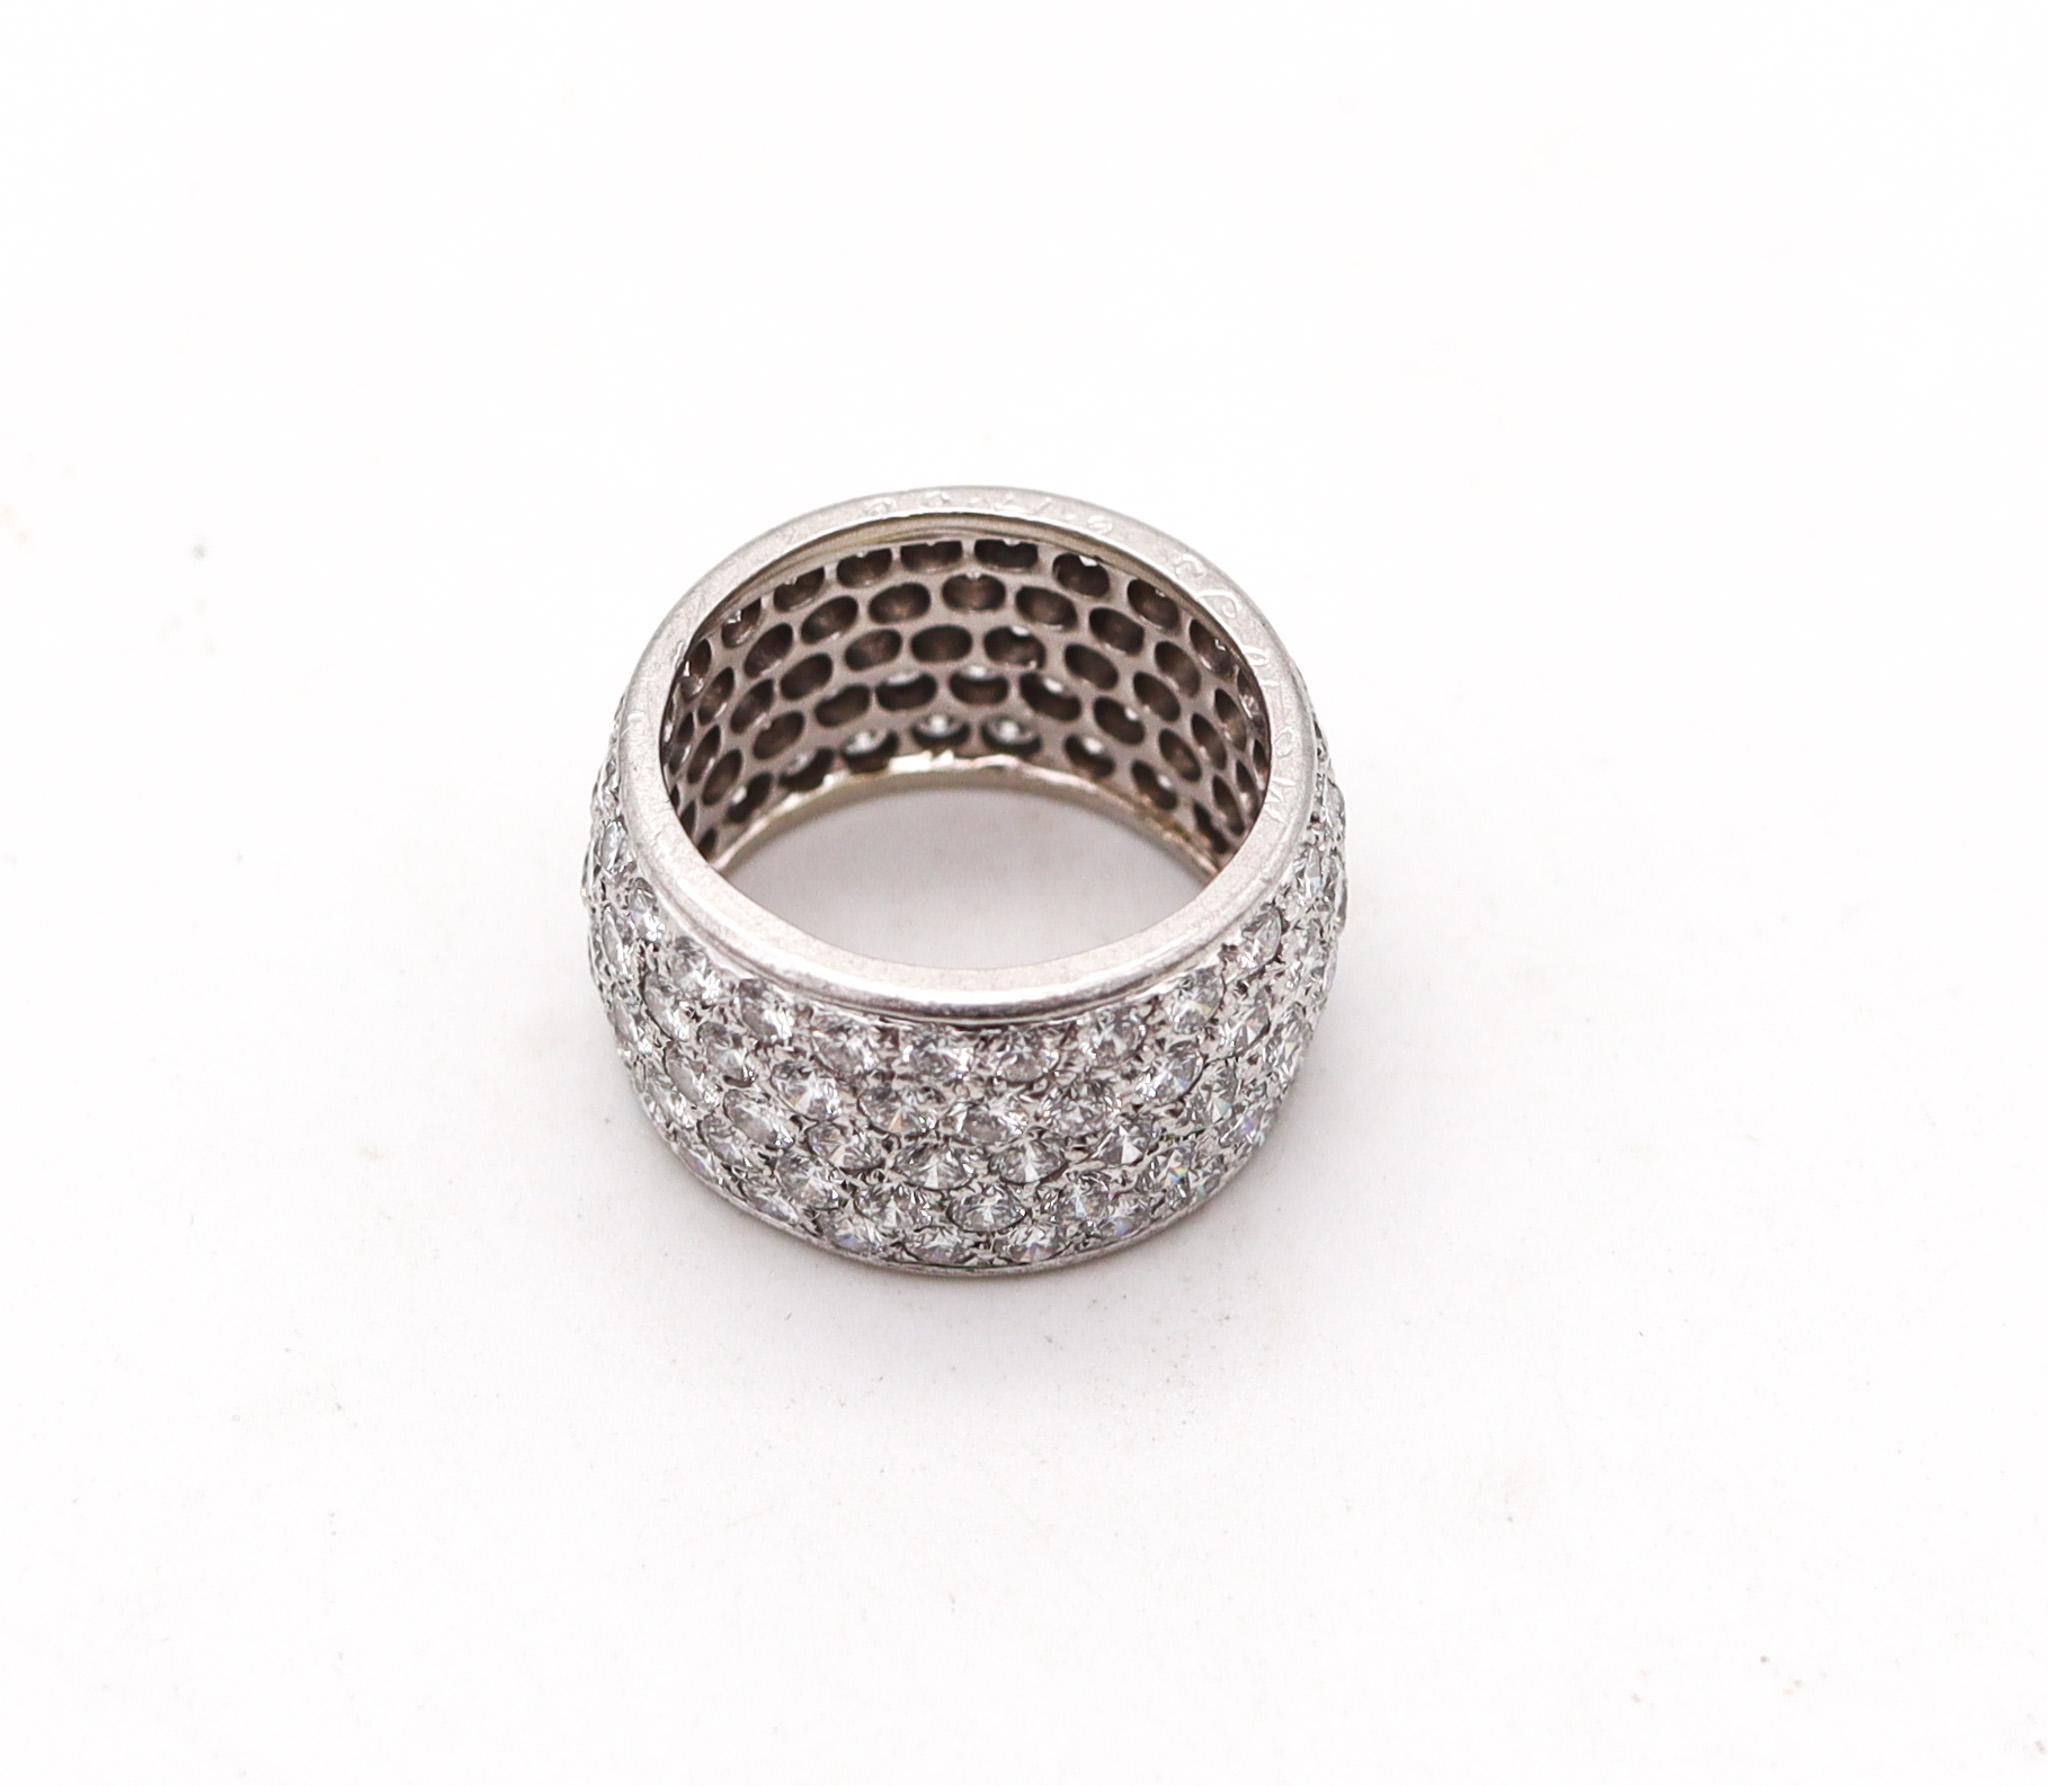 Modernist Van Cleef & Arpels Eternity Band In Platinum With 6.77 Ctw In VVS Diamonds For Sale